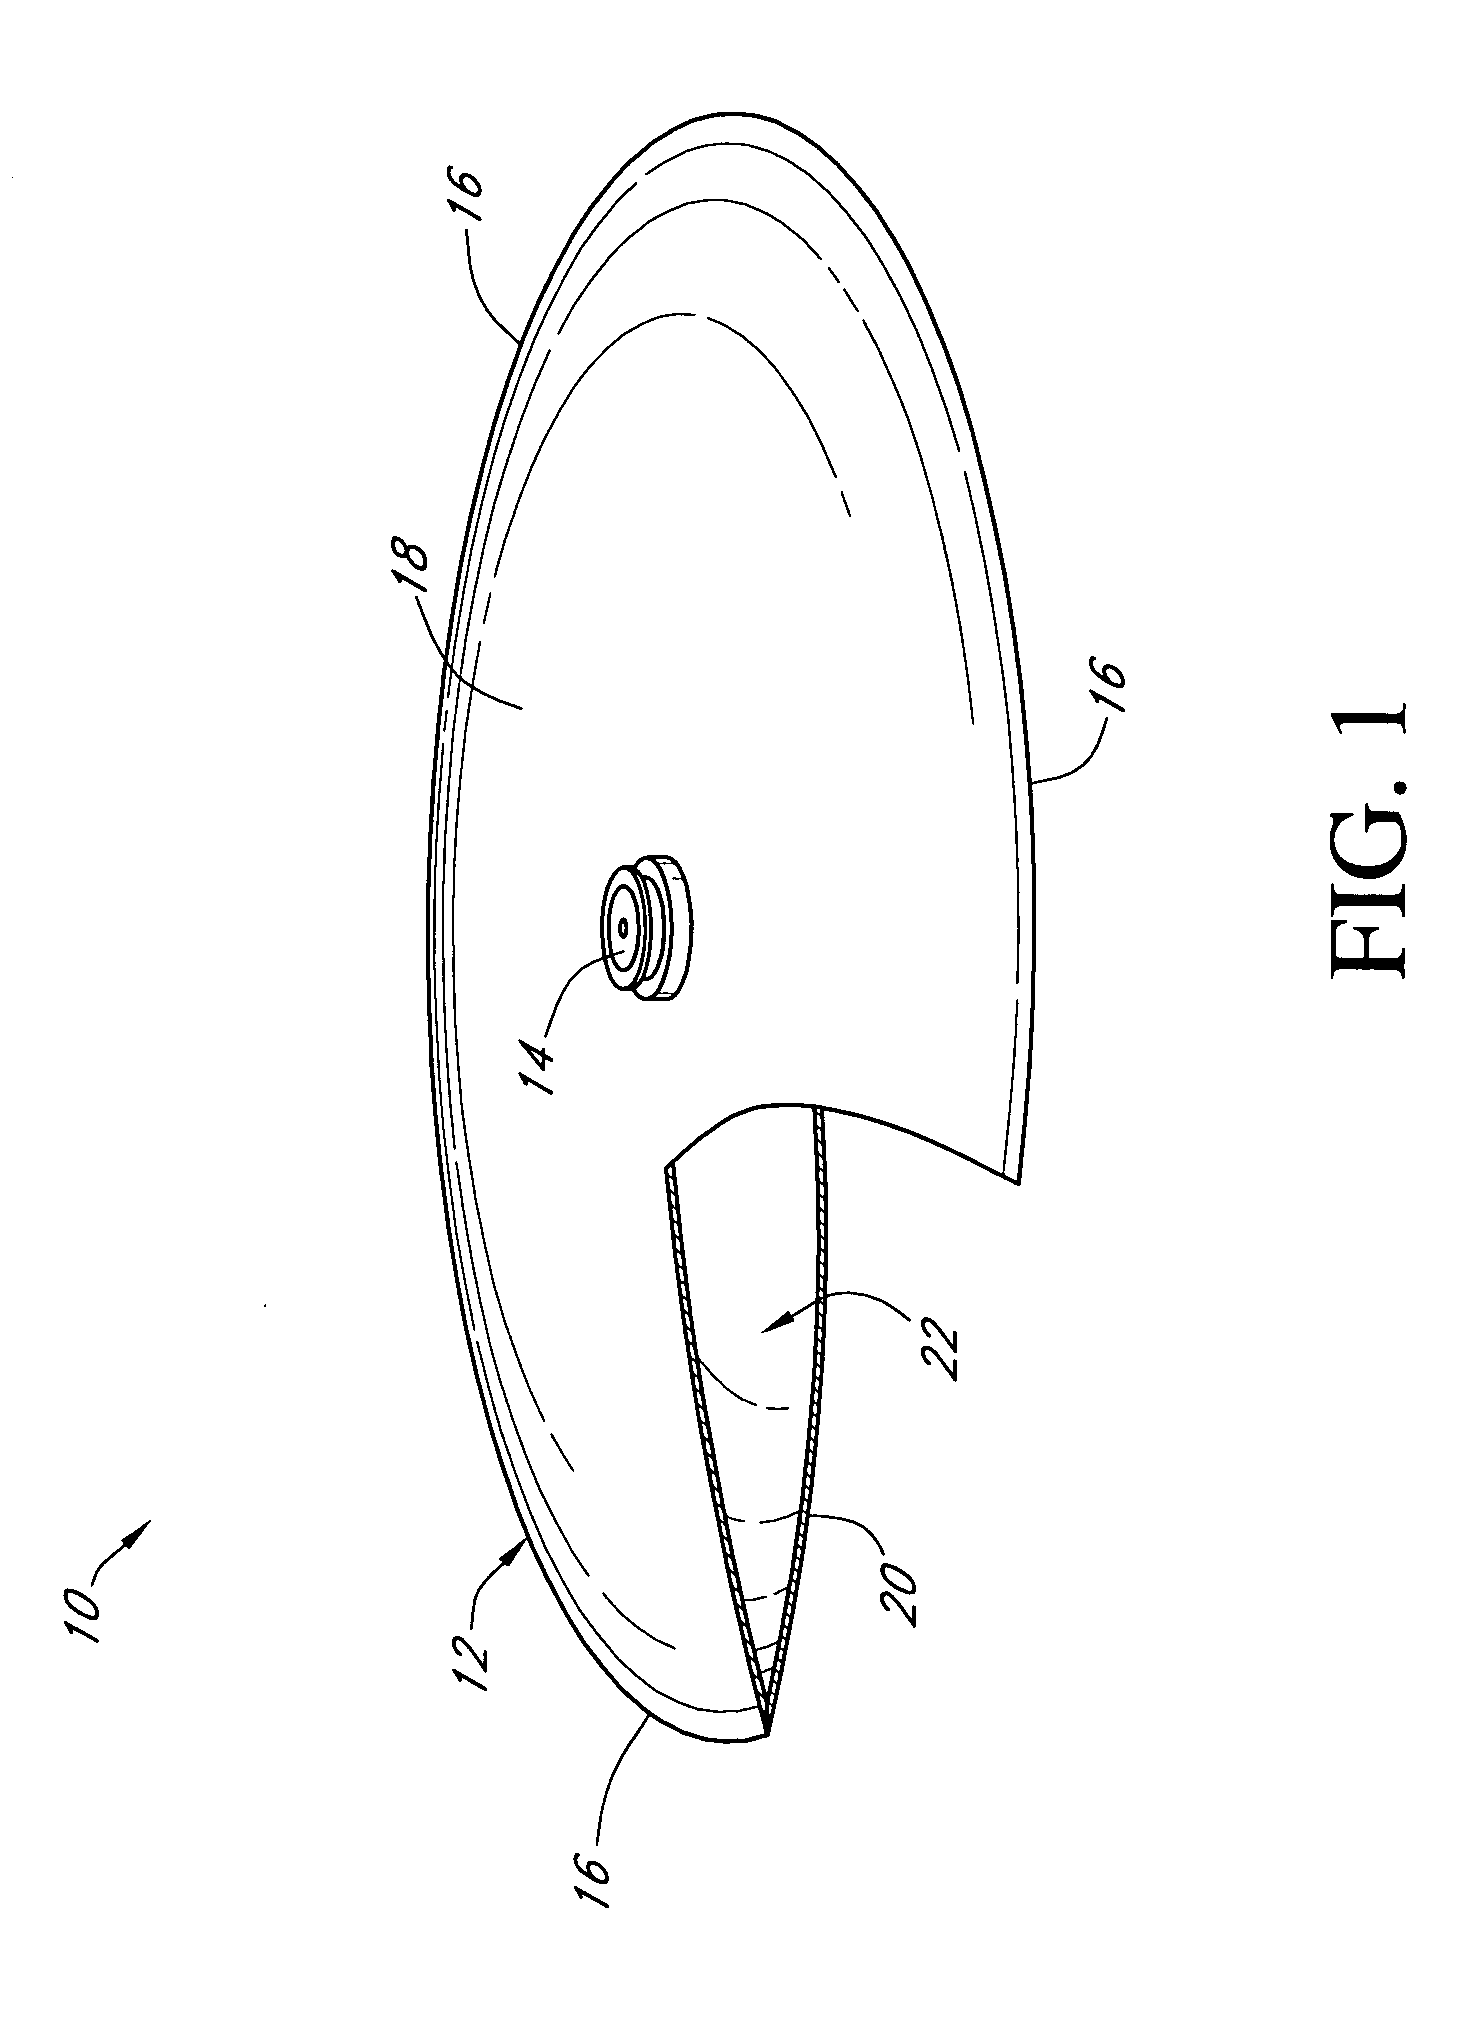 Fluid medication delivery device